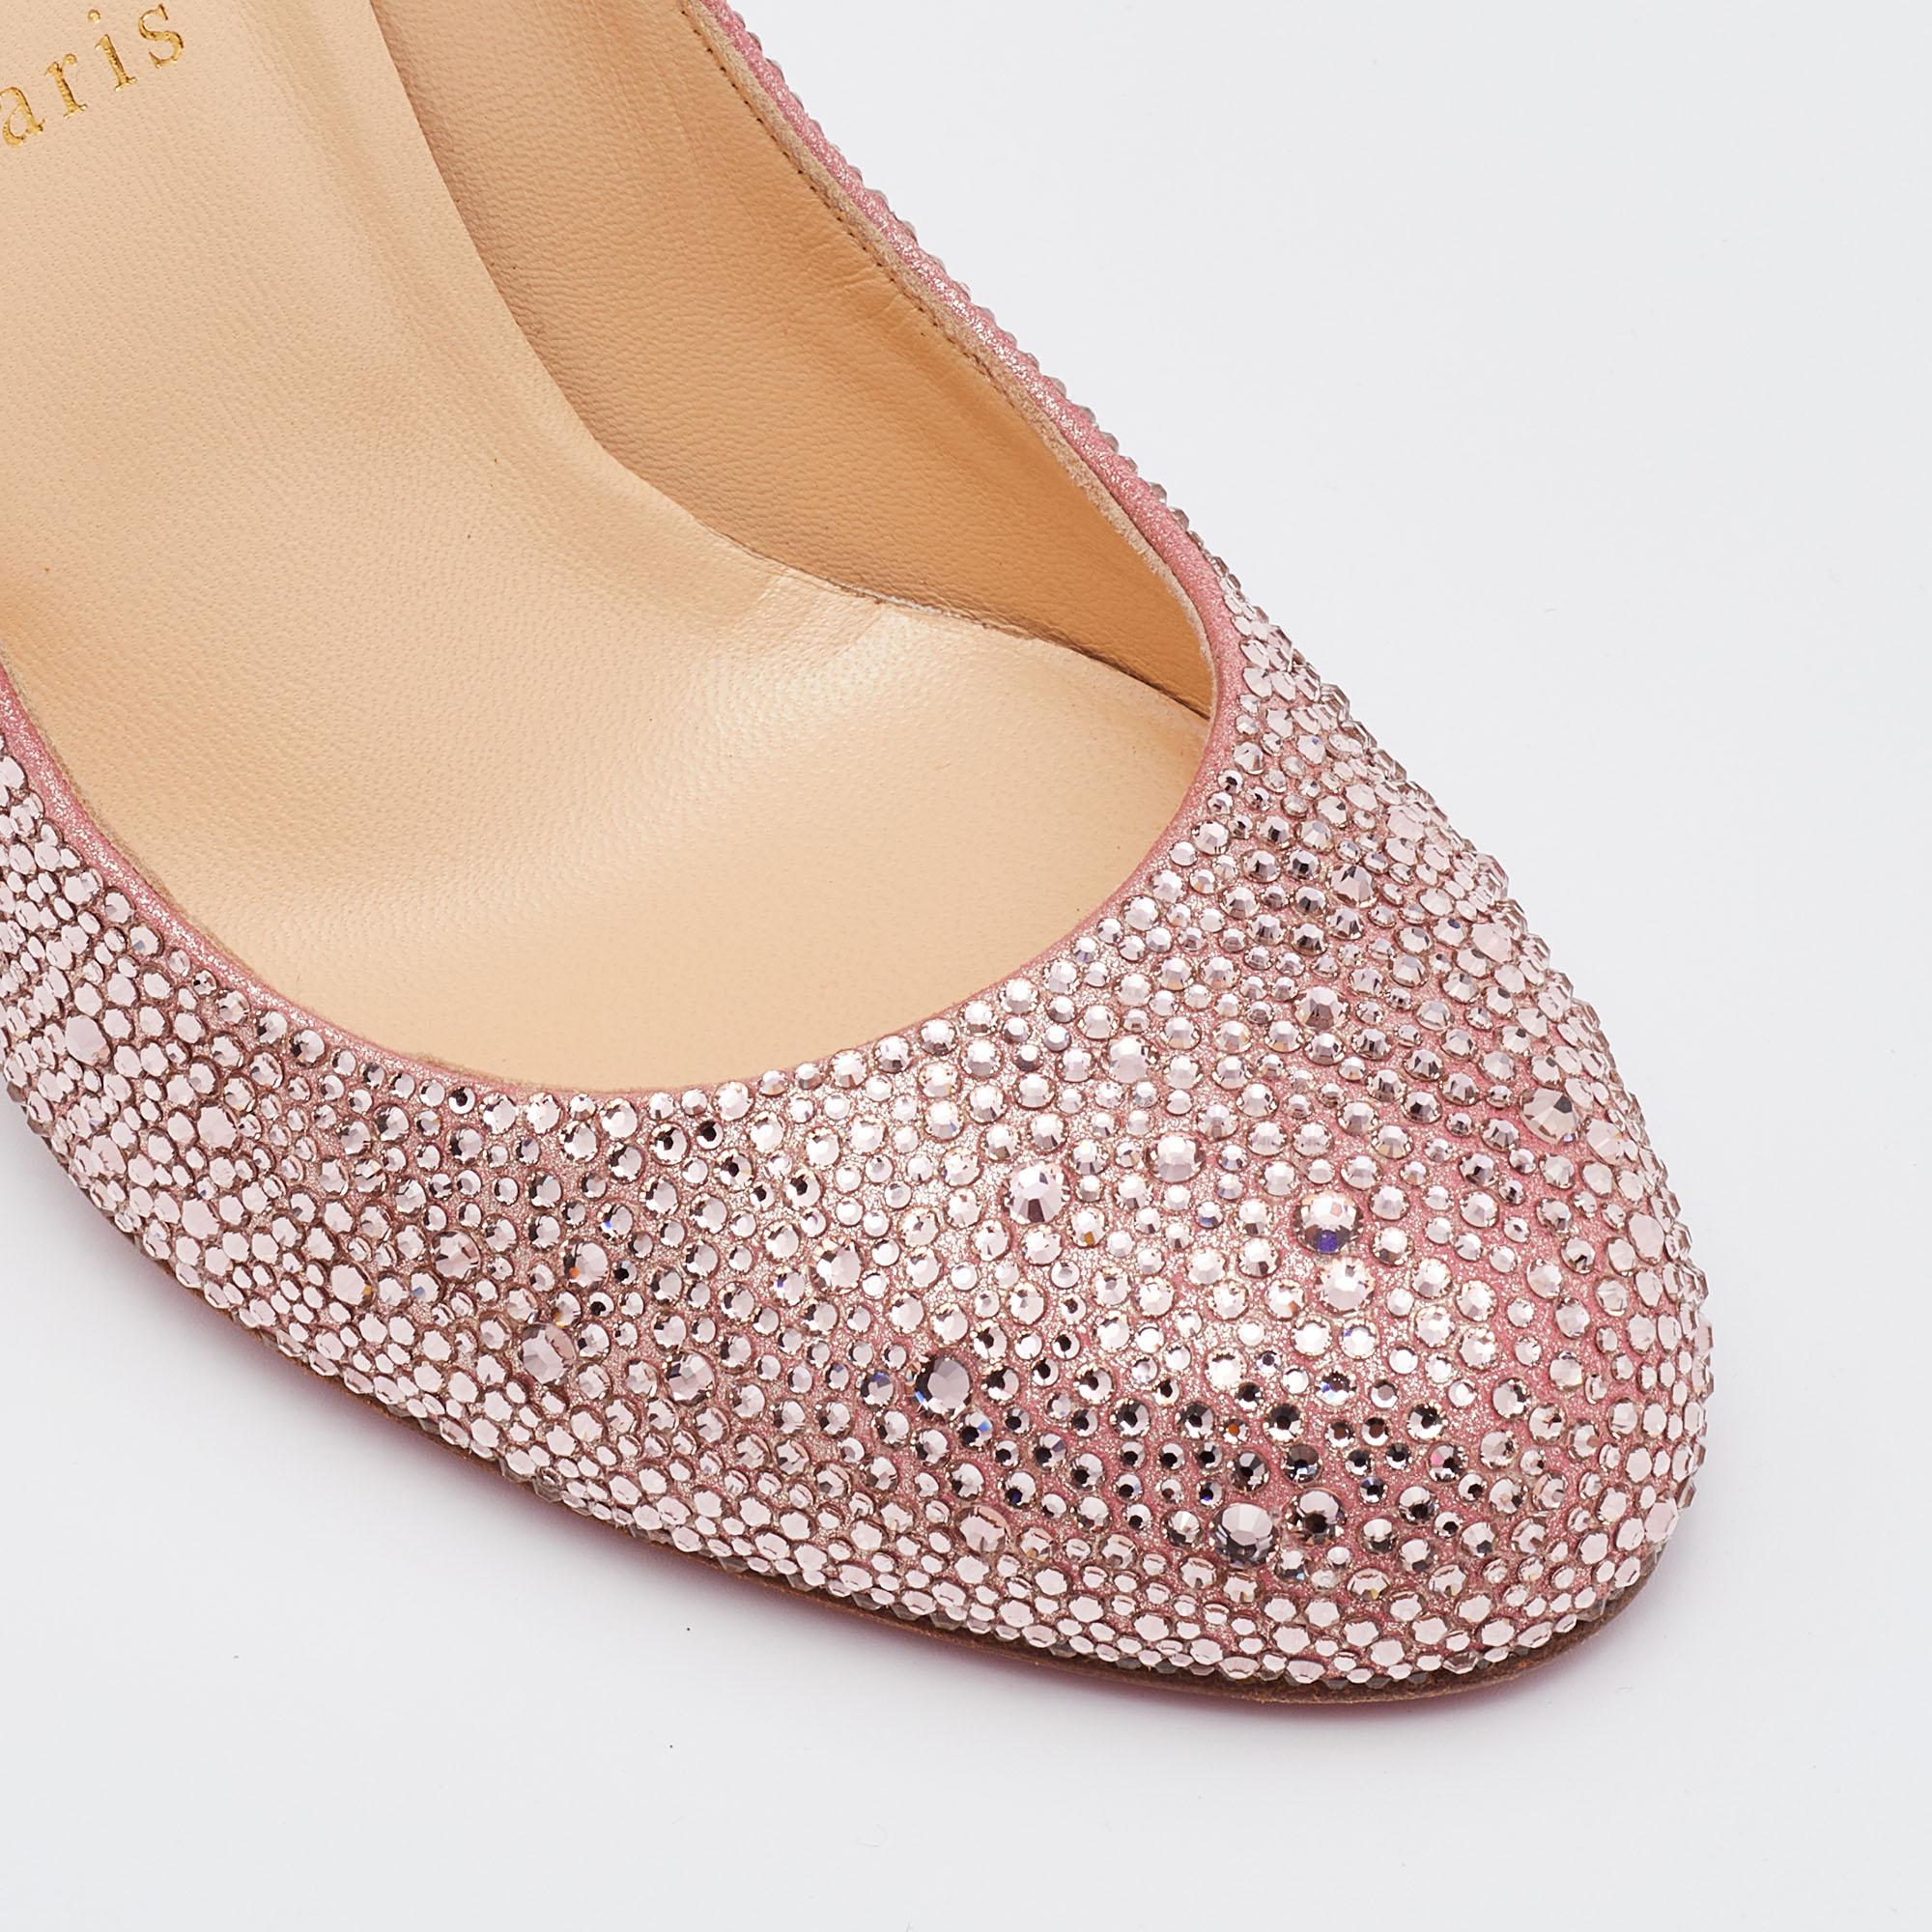 Christian Louboutin Pink Crystal Embellished Suede Fifi Strass Pumps Size 40.5 3